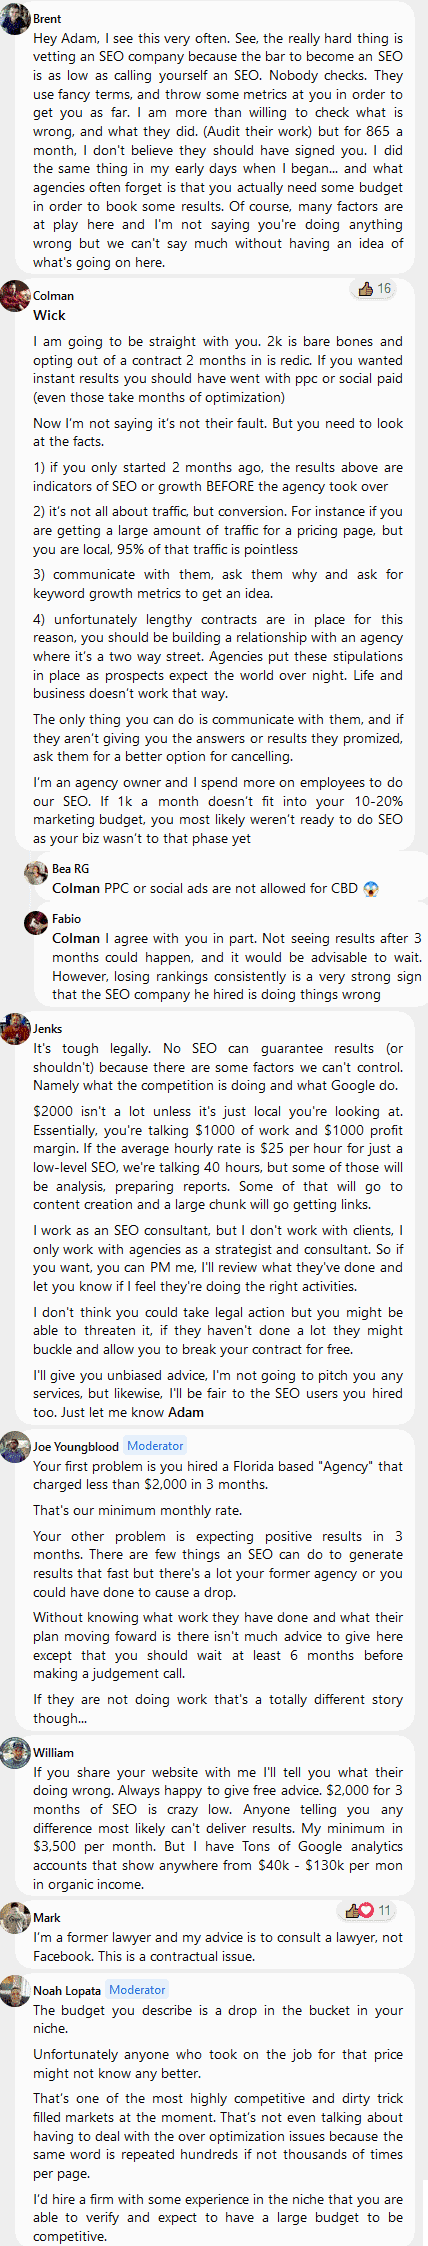 someone asked for legal advice s he wanted to cancel a 12-month seo contract due to roi unreached after the first 3-month